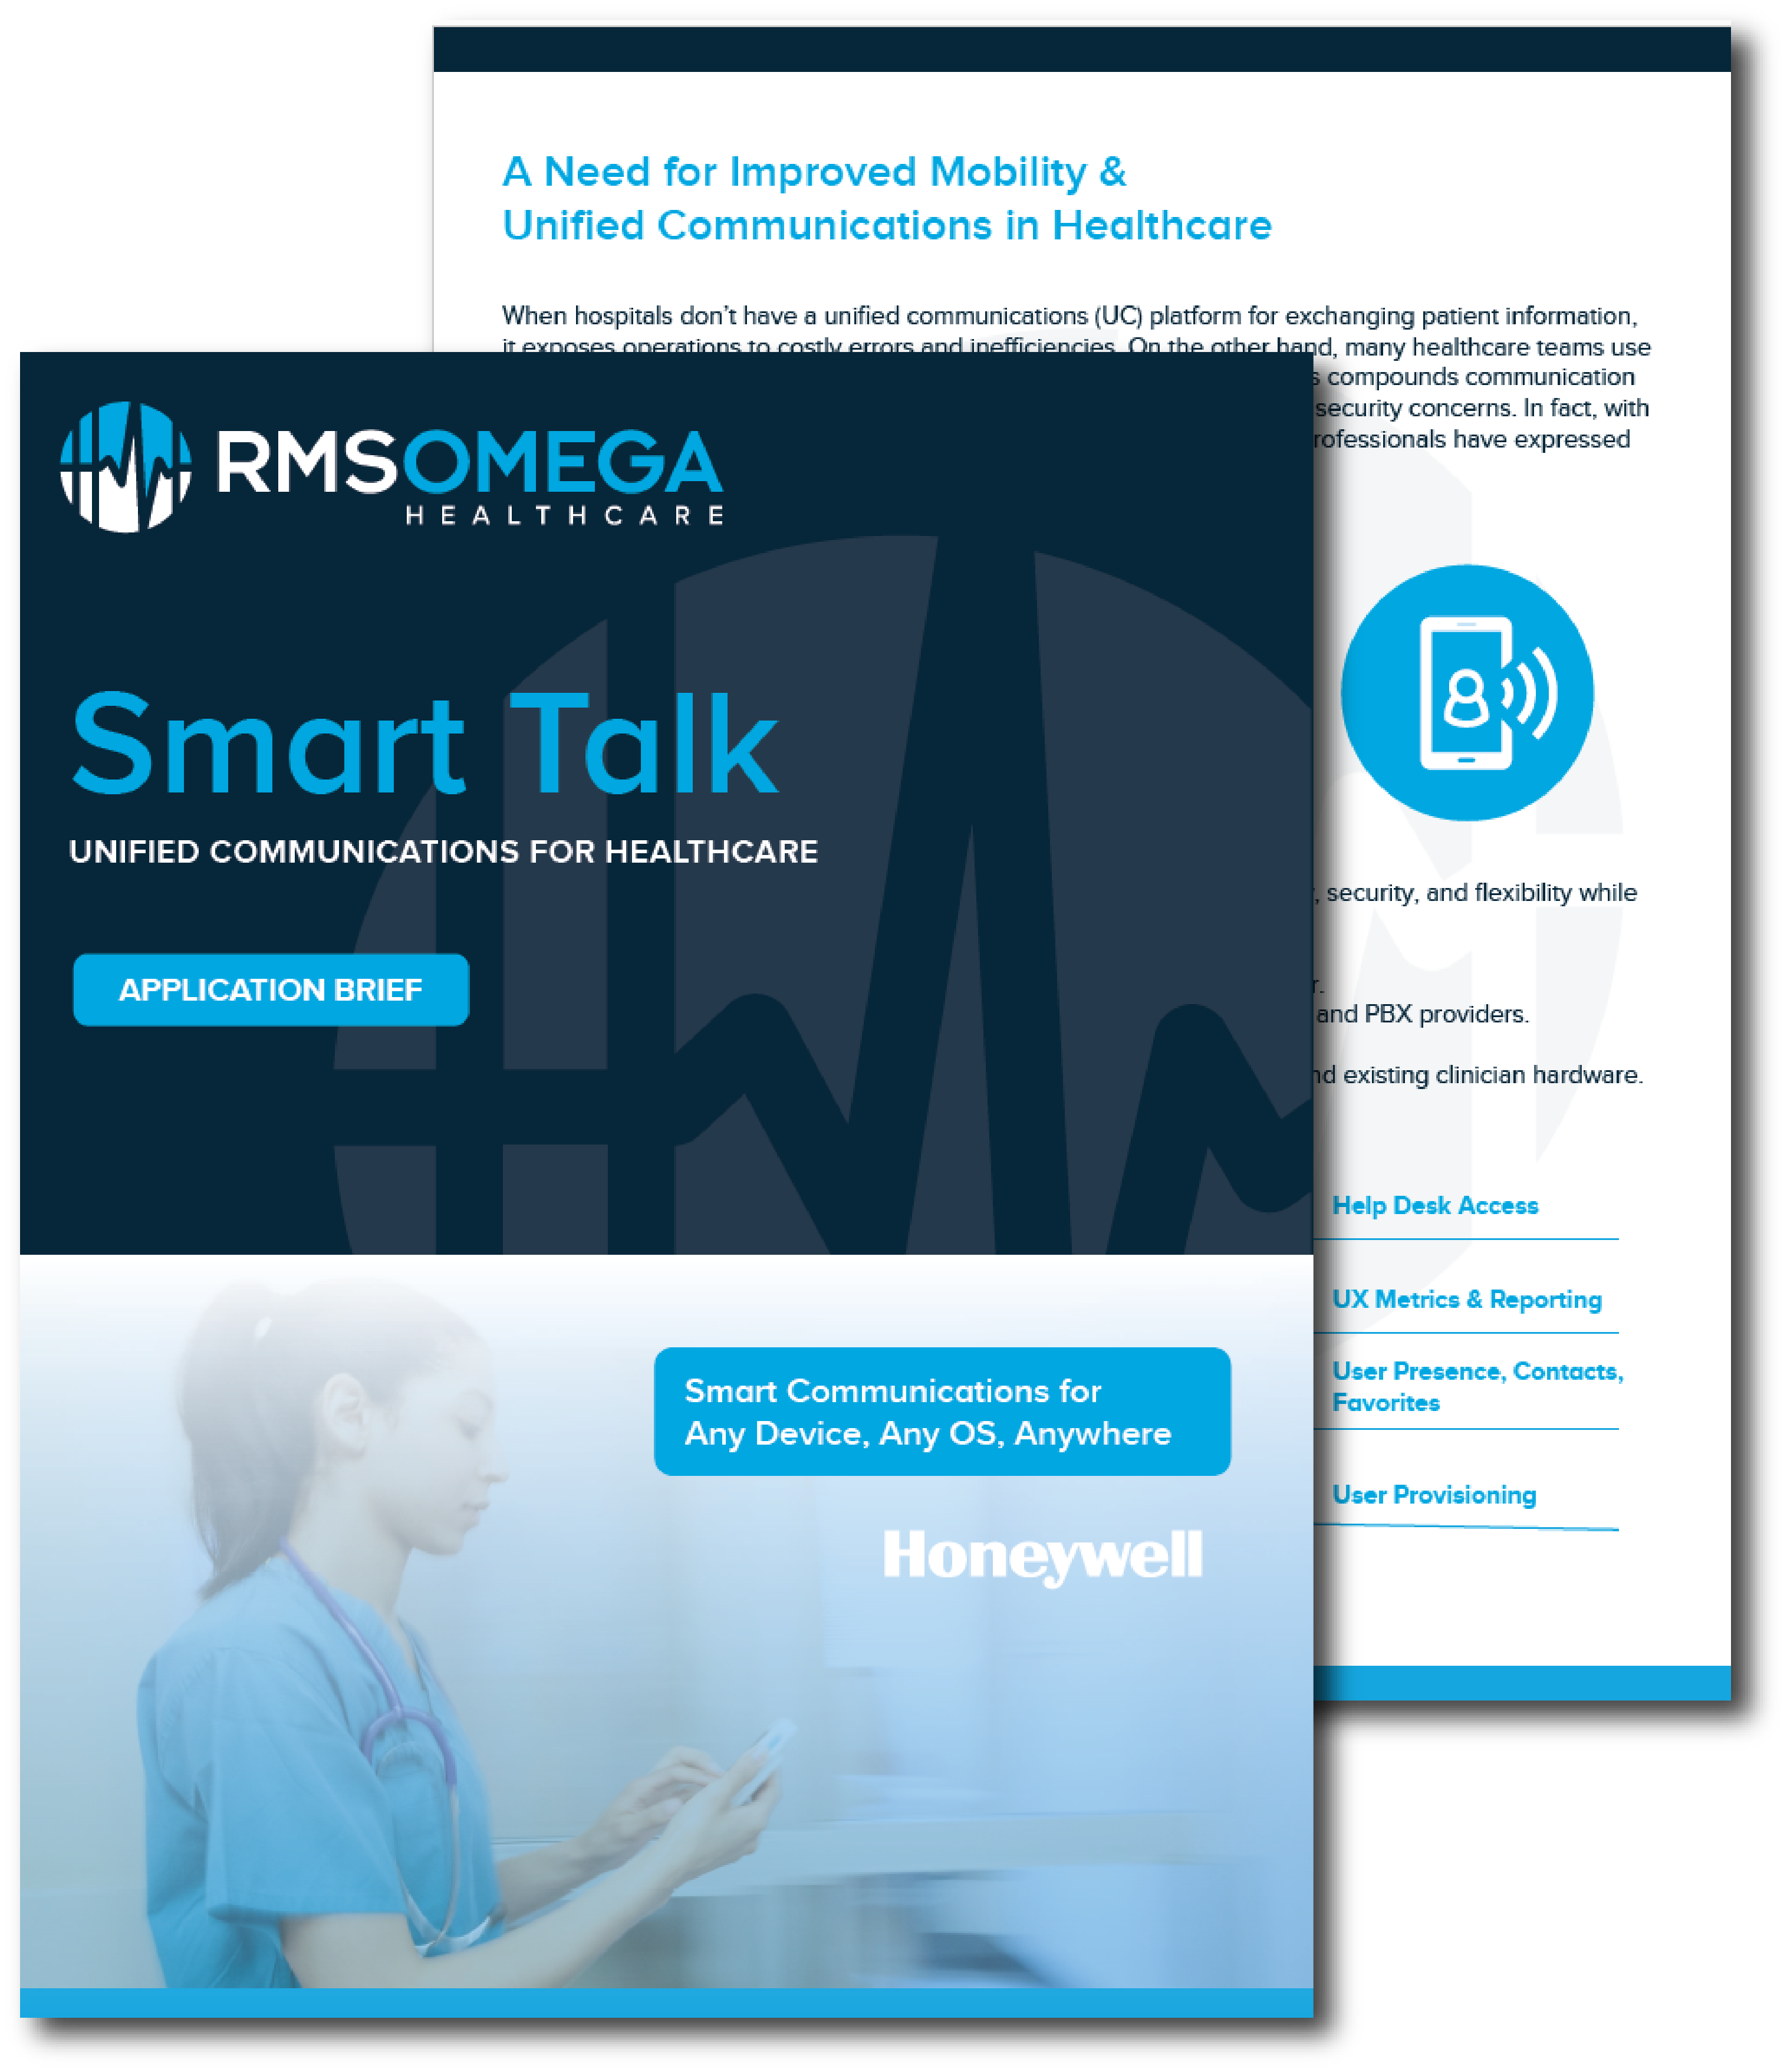 Smart Talk unified healthcare communications application brief